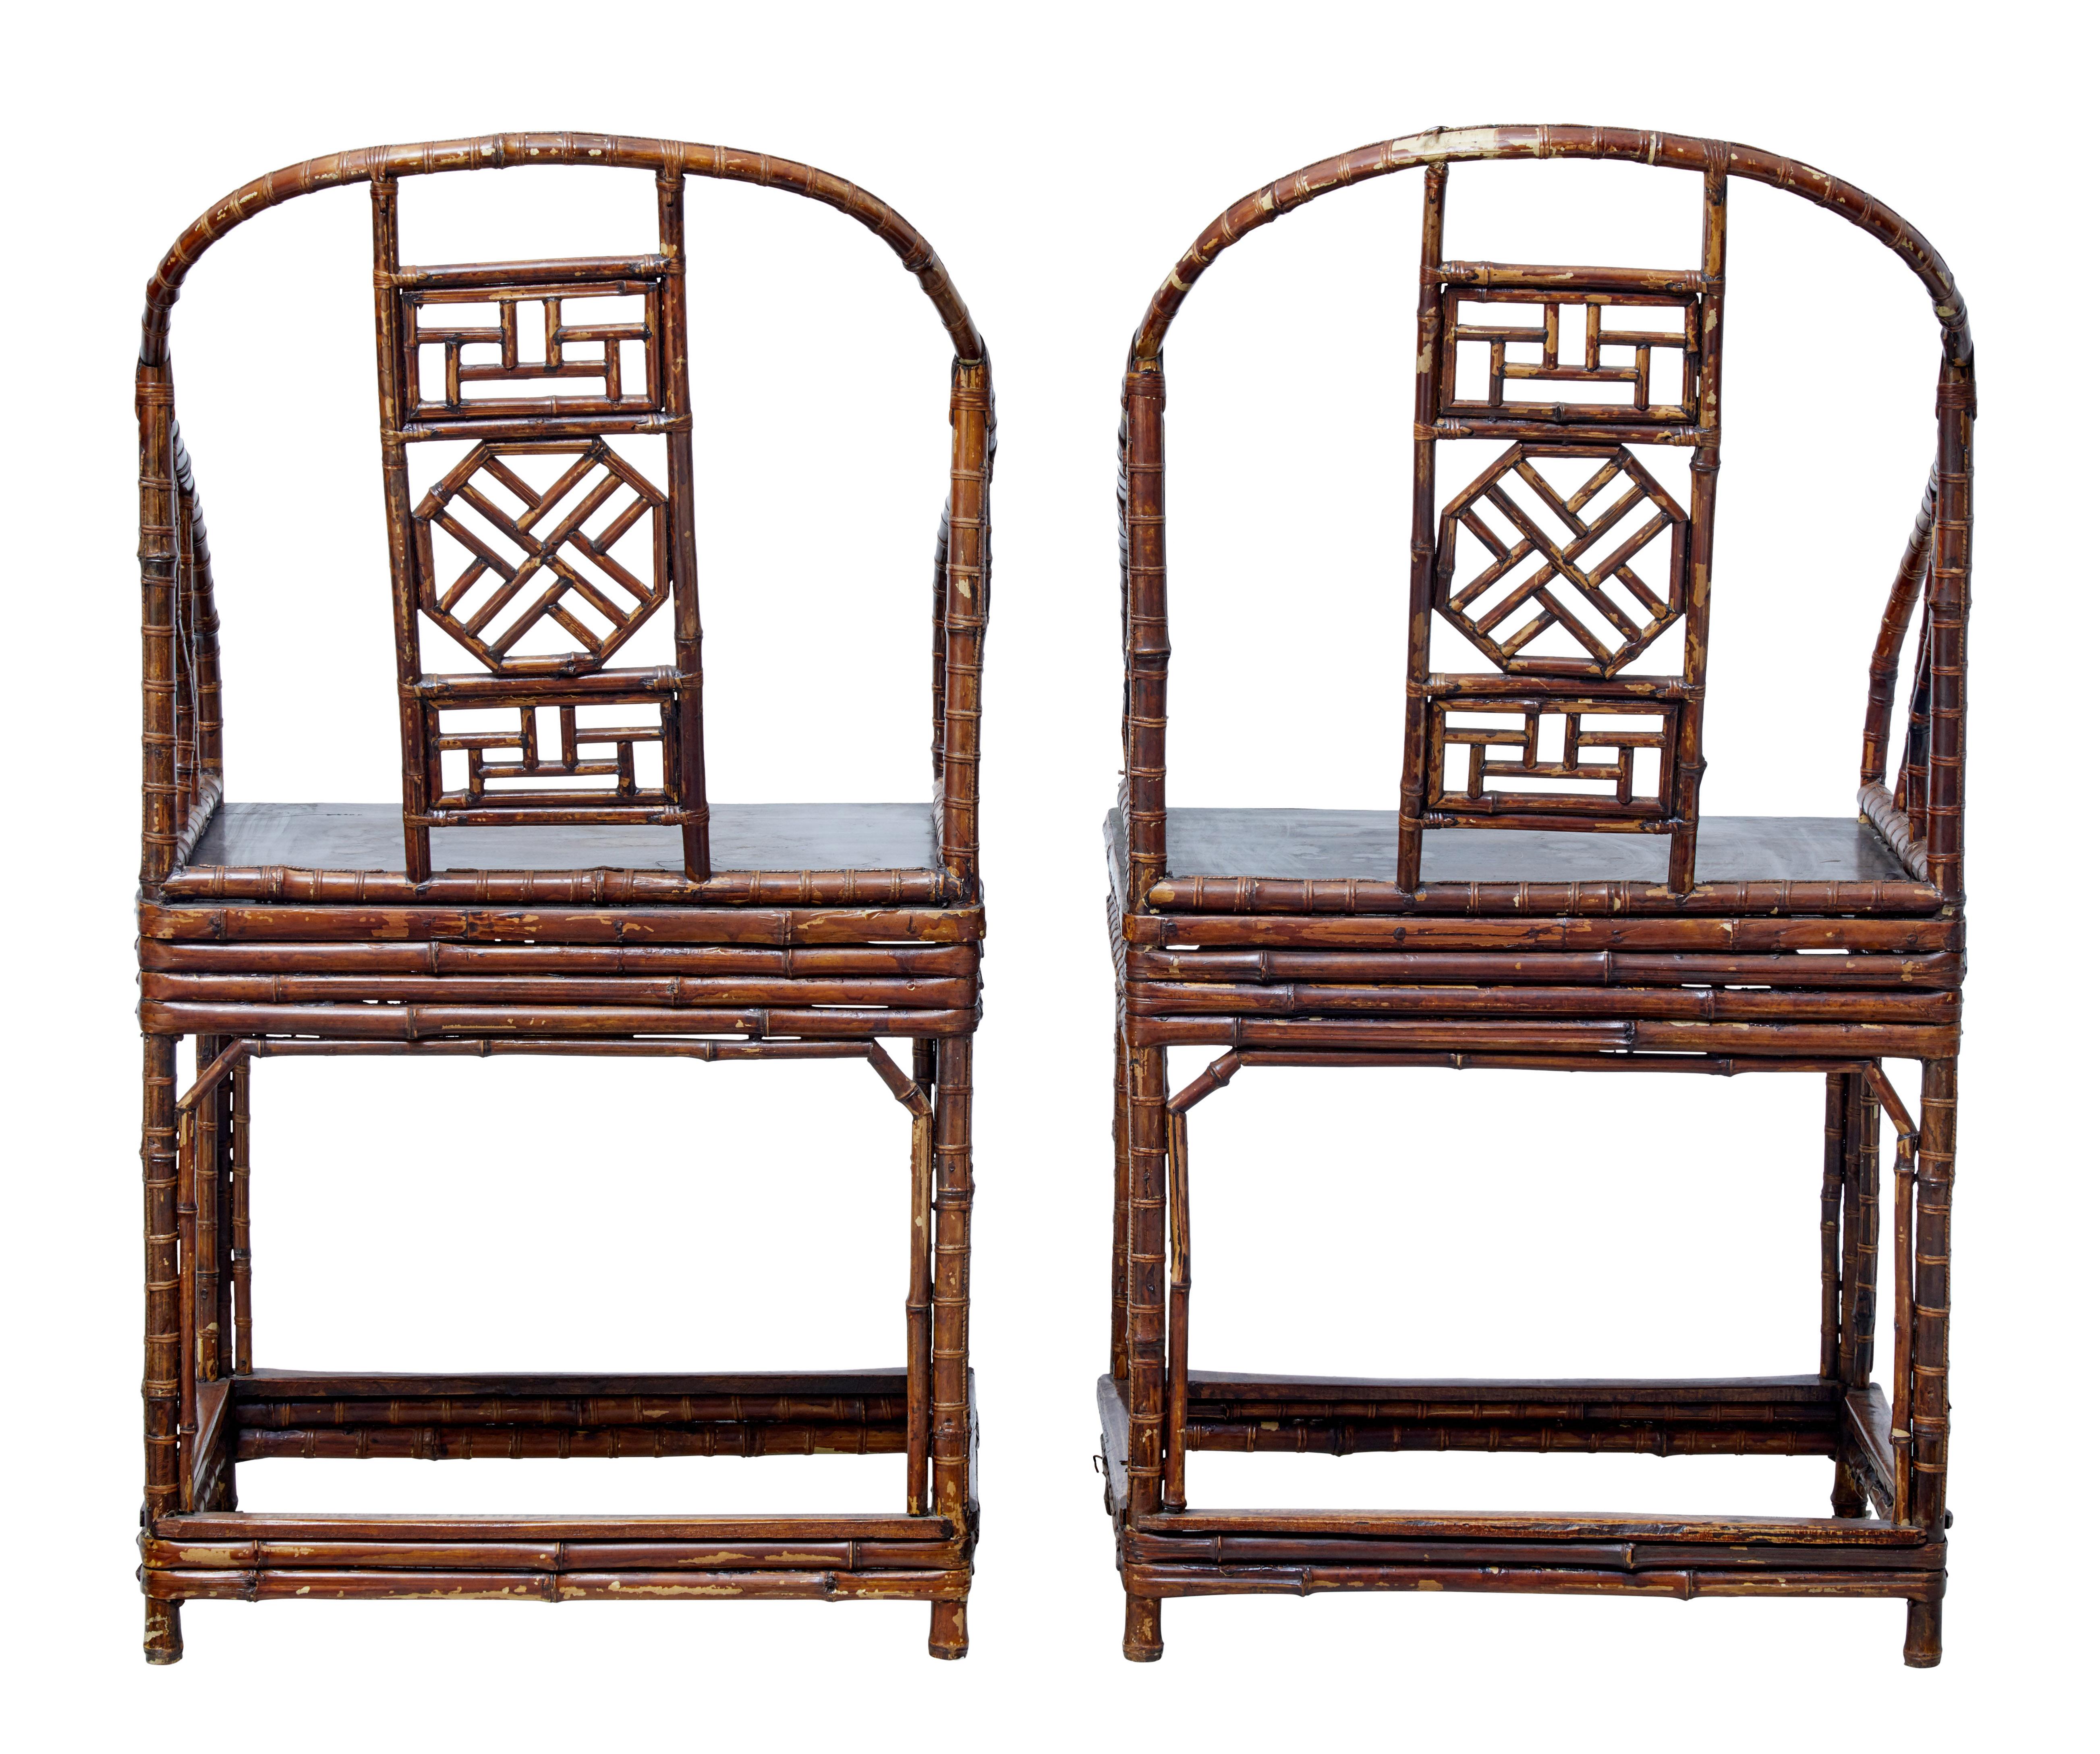 Pair of Chinese export canework chairs, circa 1890.

Good elegant examples of this Chinese craft.

Made from thin cane which has been multi layered for reinforcement. Shaped back with further canework detailing in the back rest. Plain flat seat